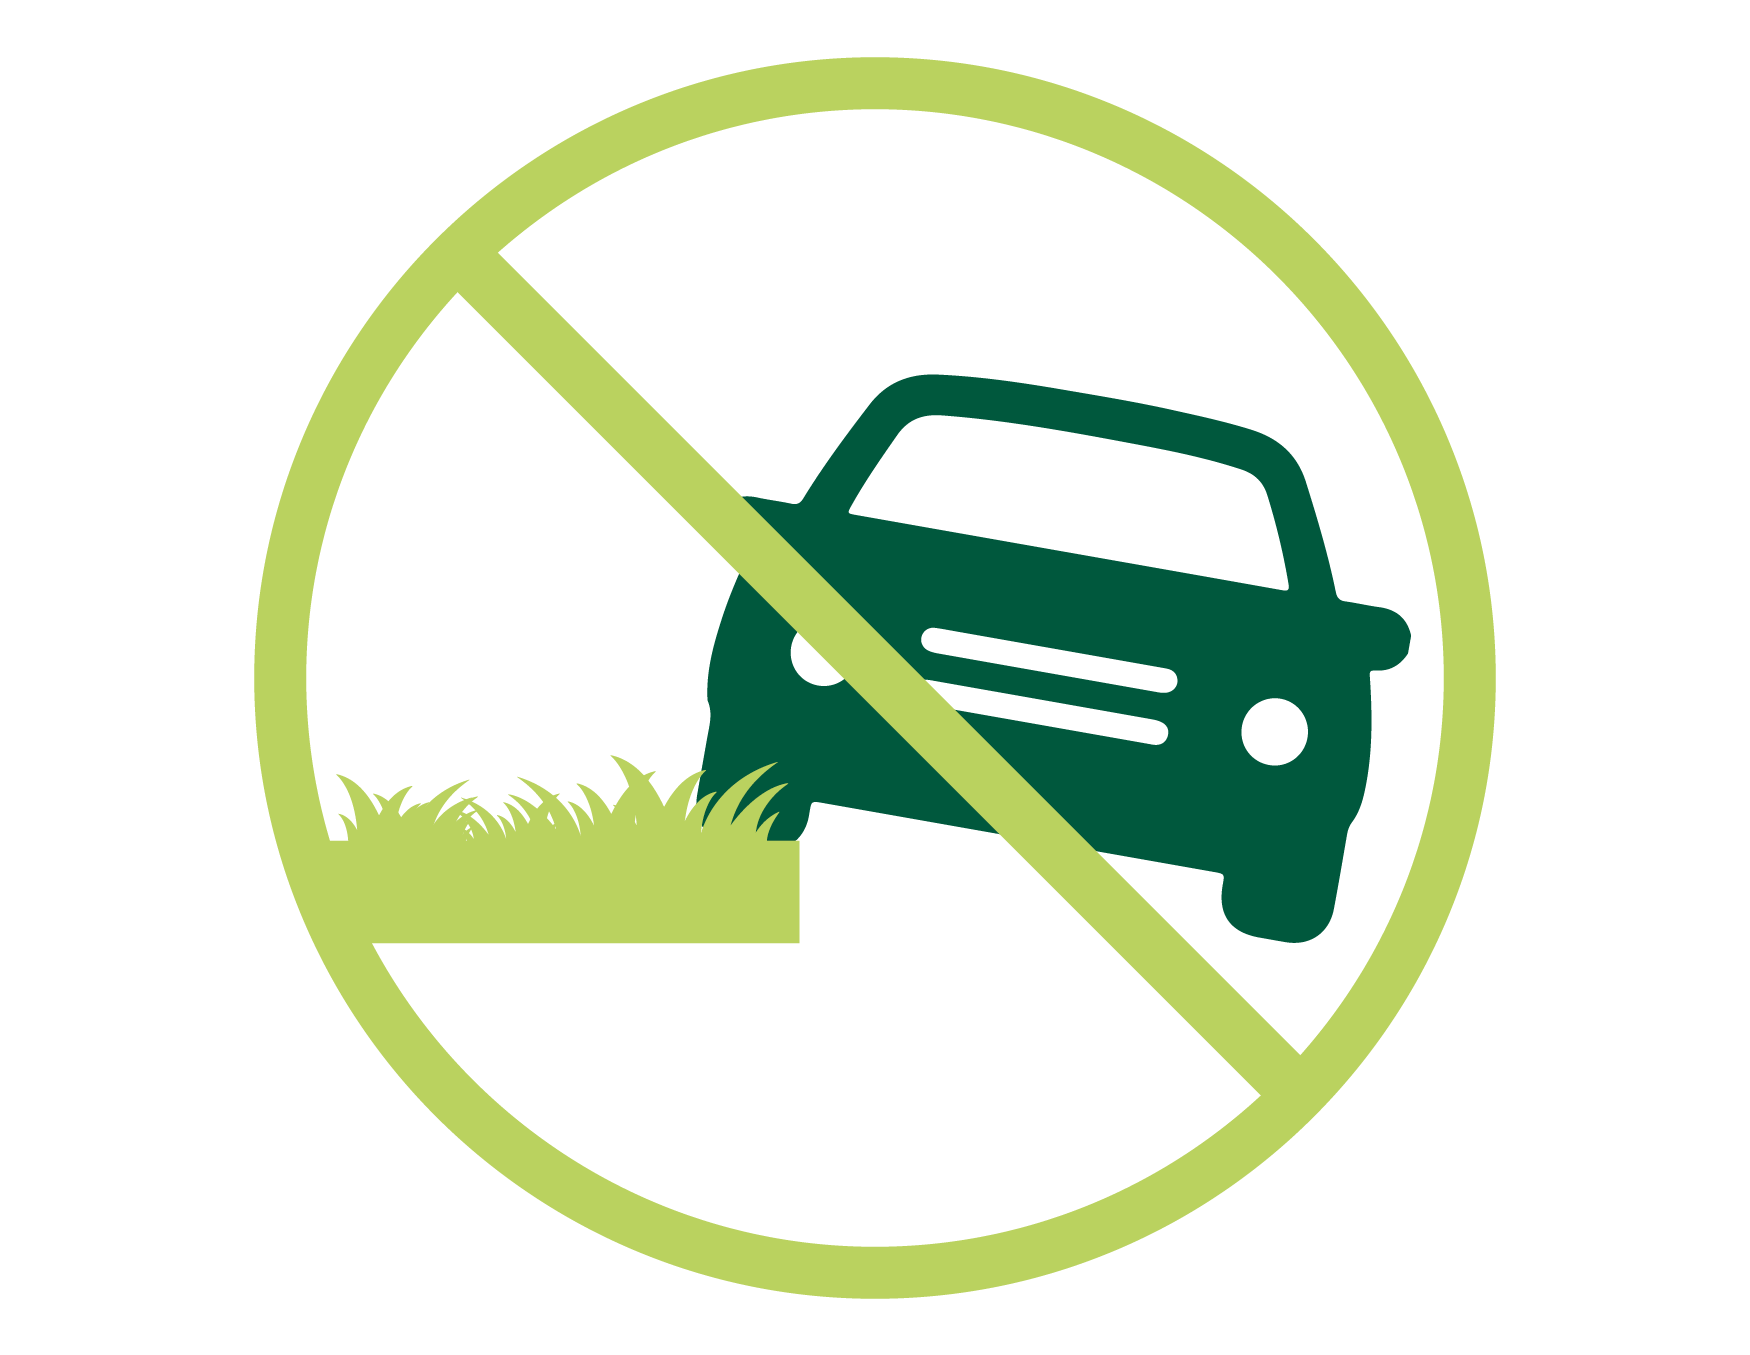 Don't park on grass verges icon.